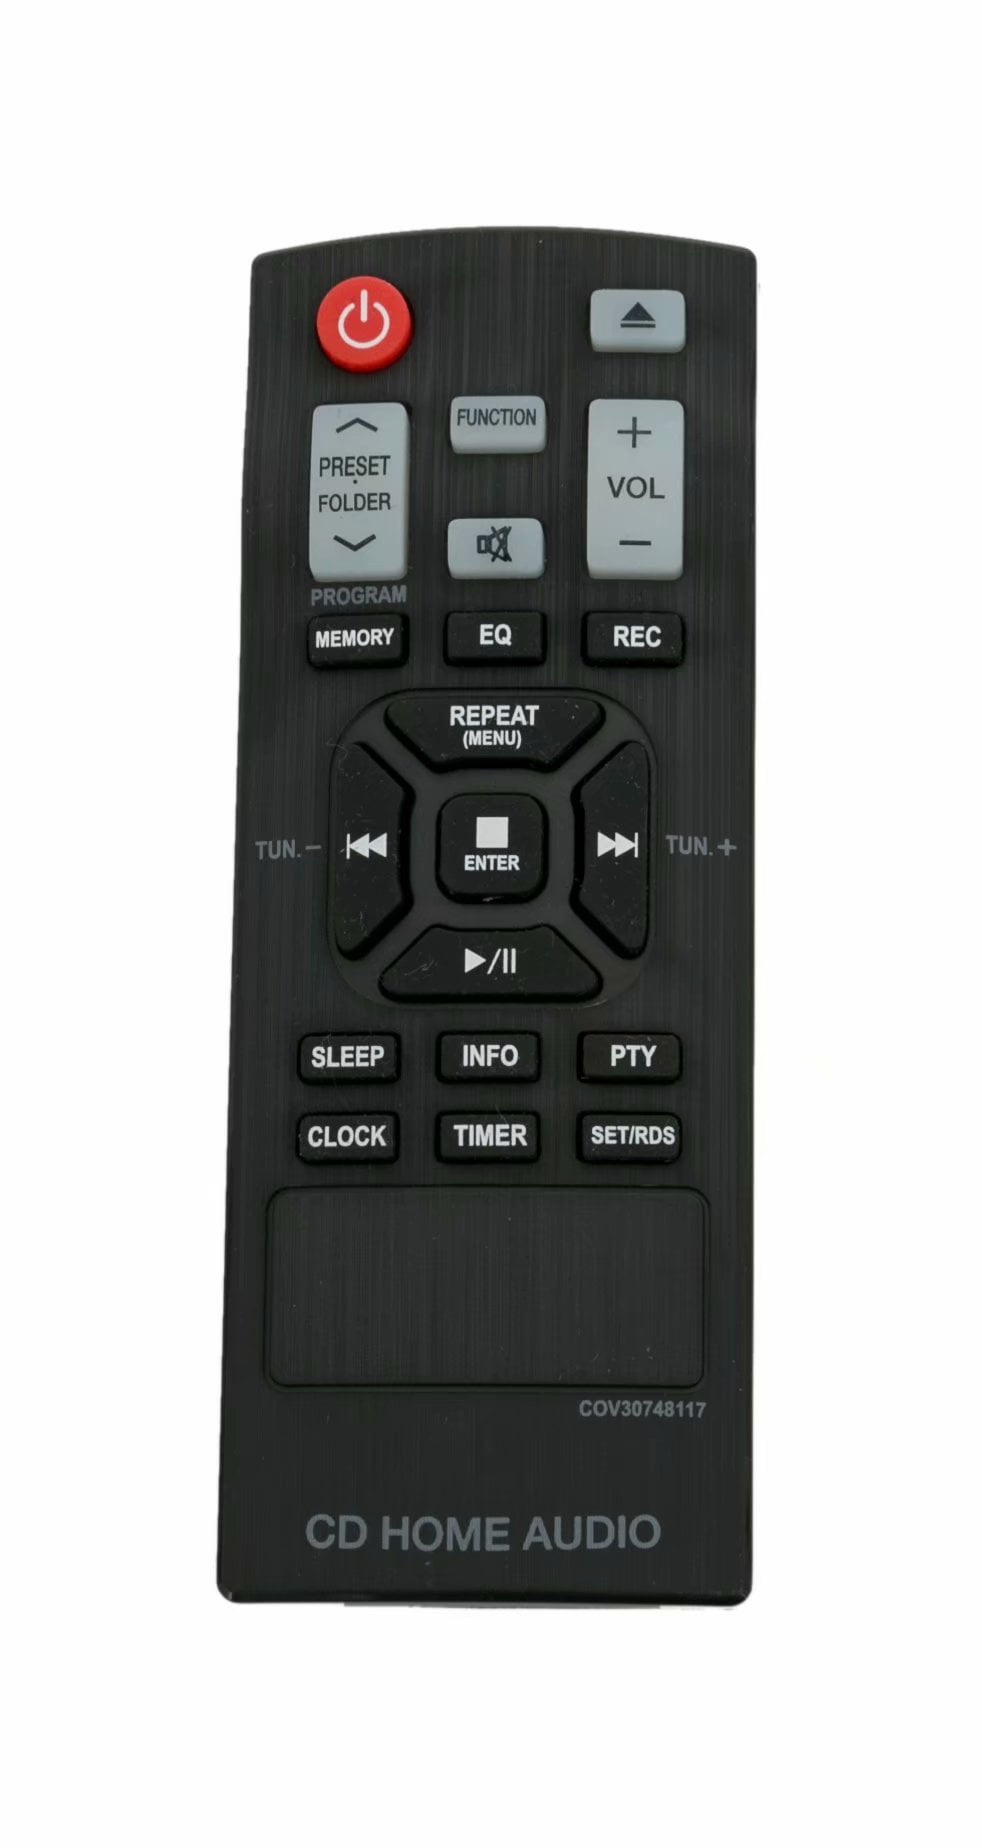 Genuine LG AKB73655751 CD Home Audio Remote Control with Fresh Batteries 